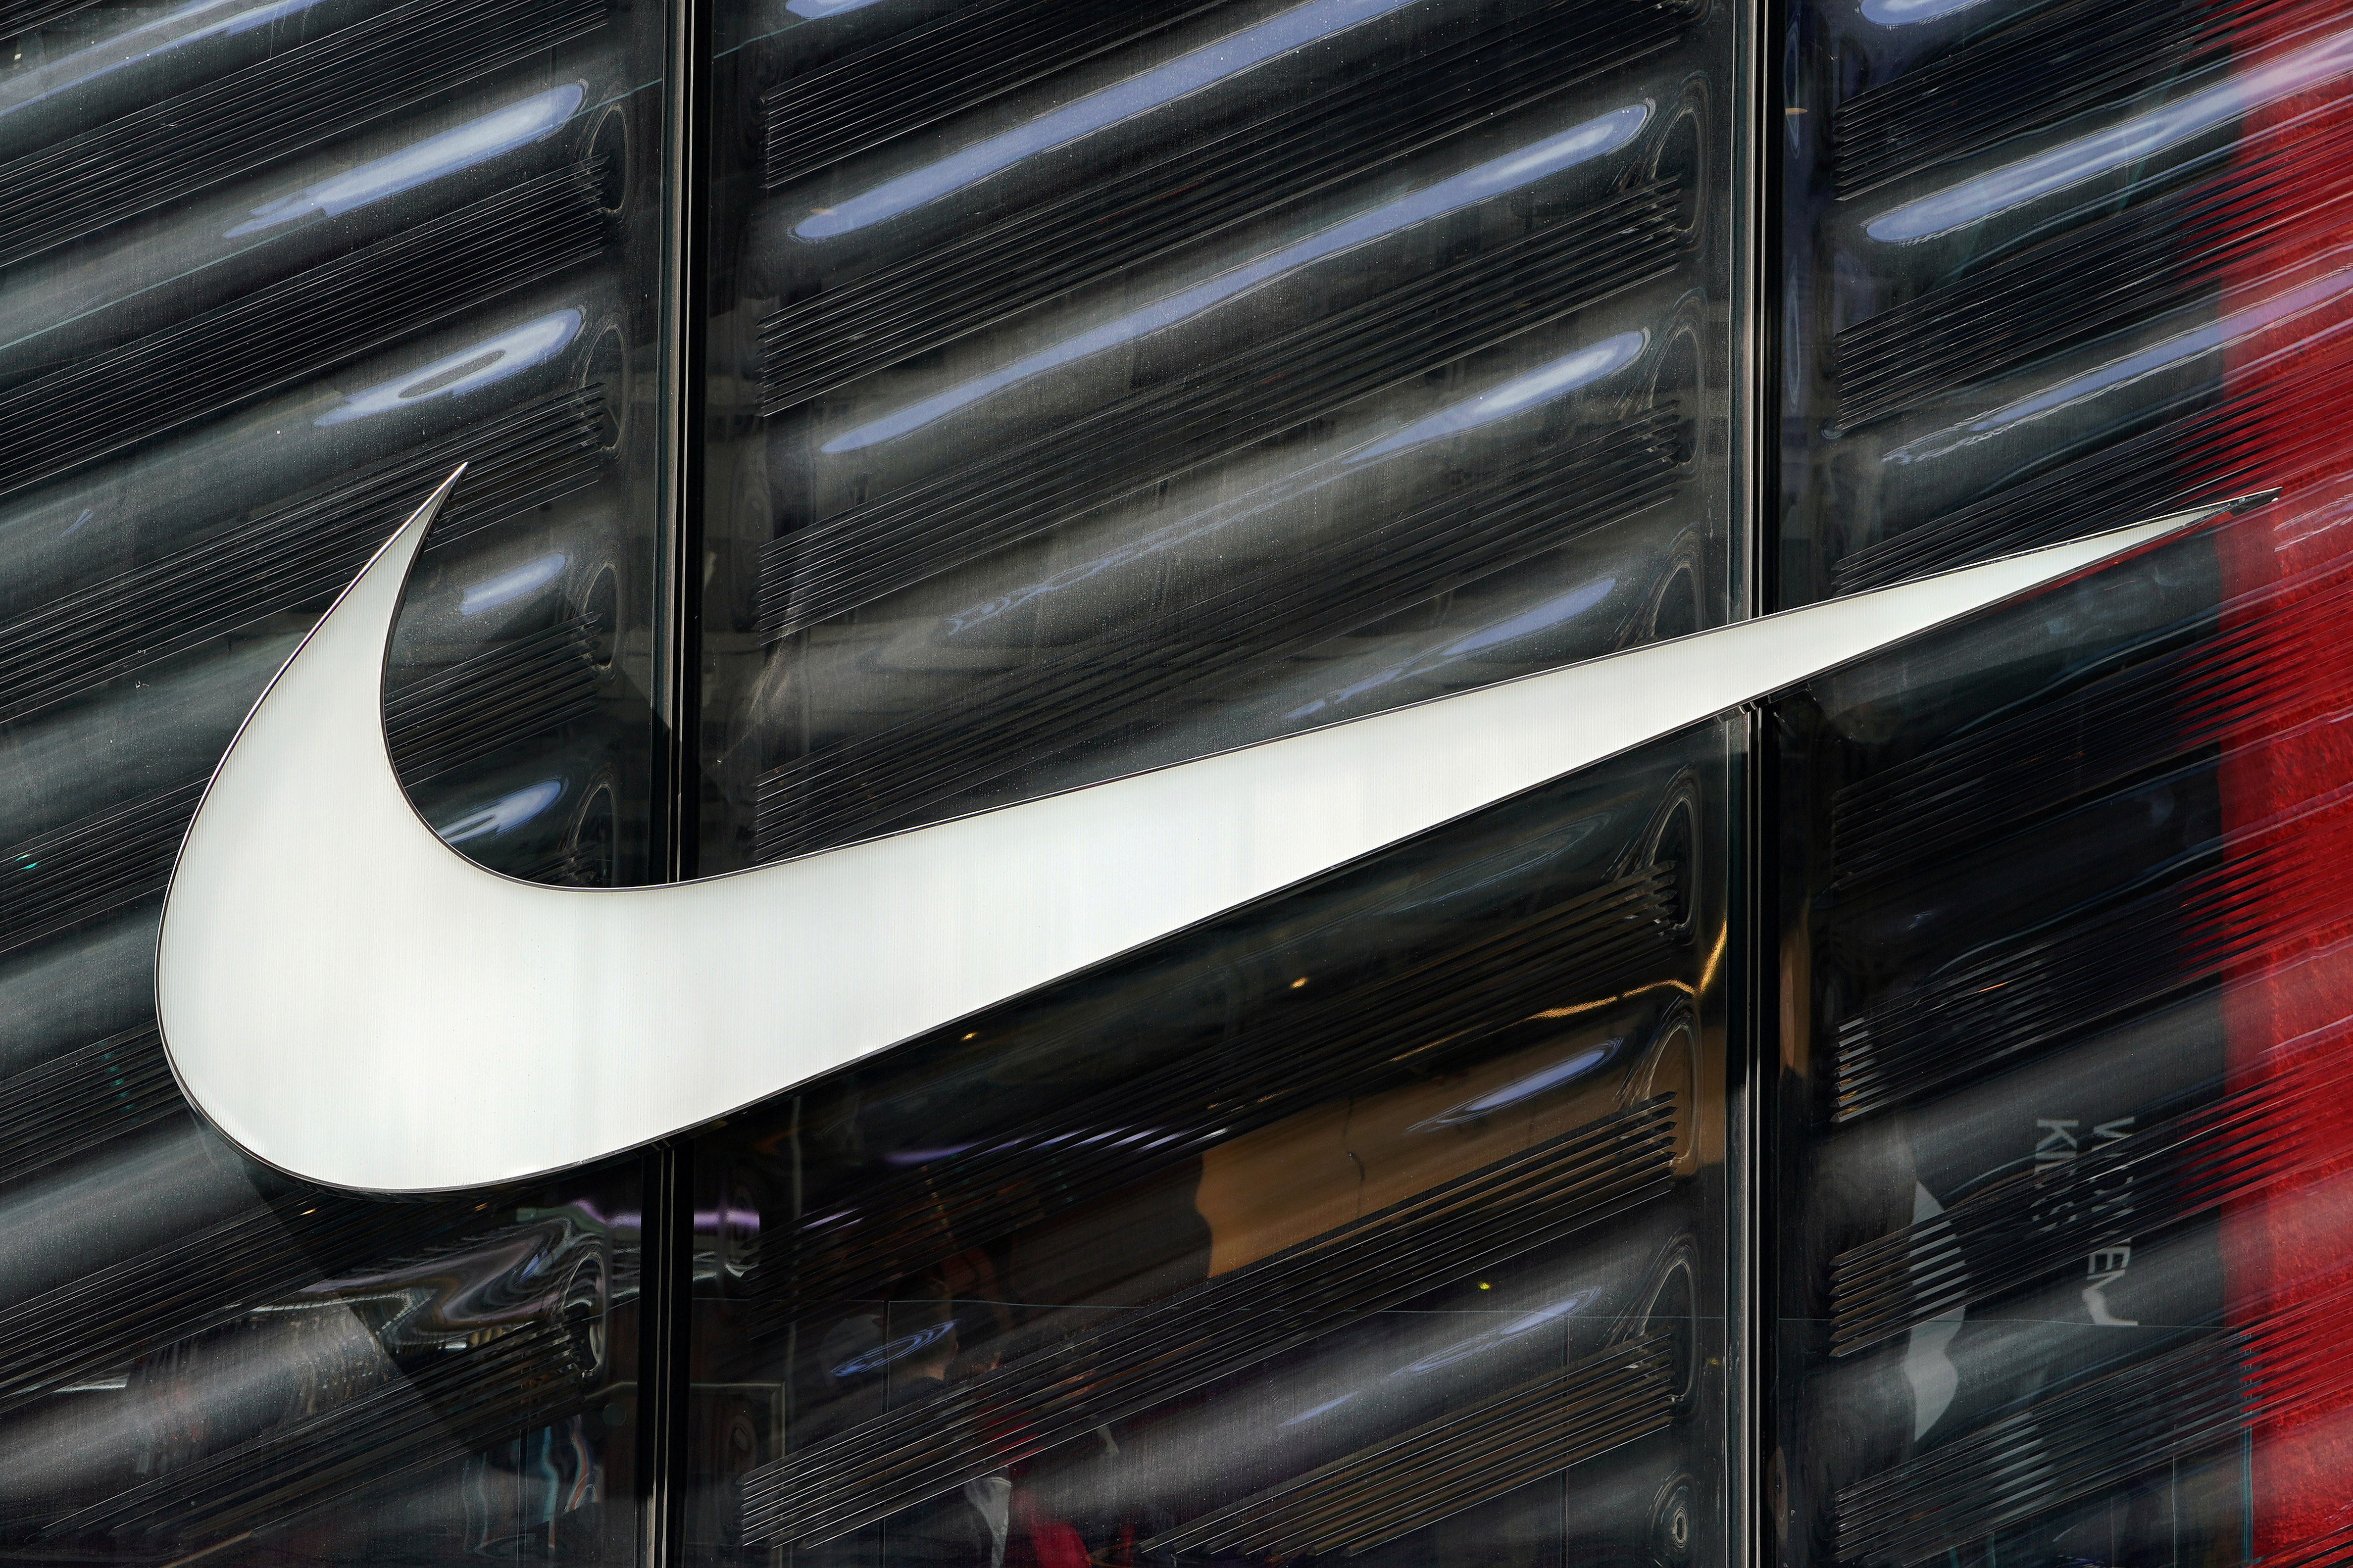 Comandante Tristemente Empírico Vietnam says its Nike manufacturers back to full operations | Reuters